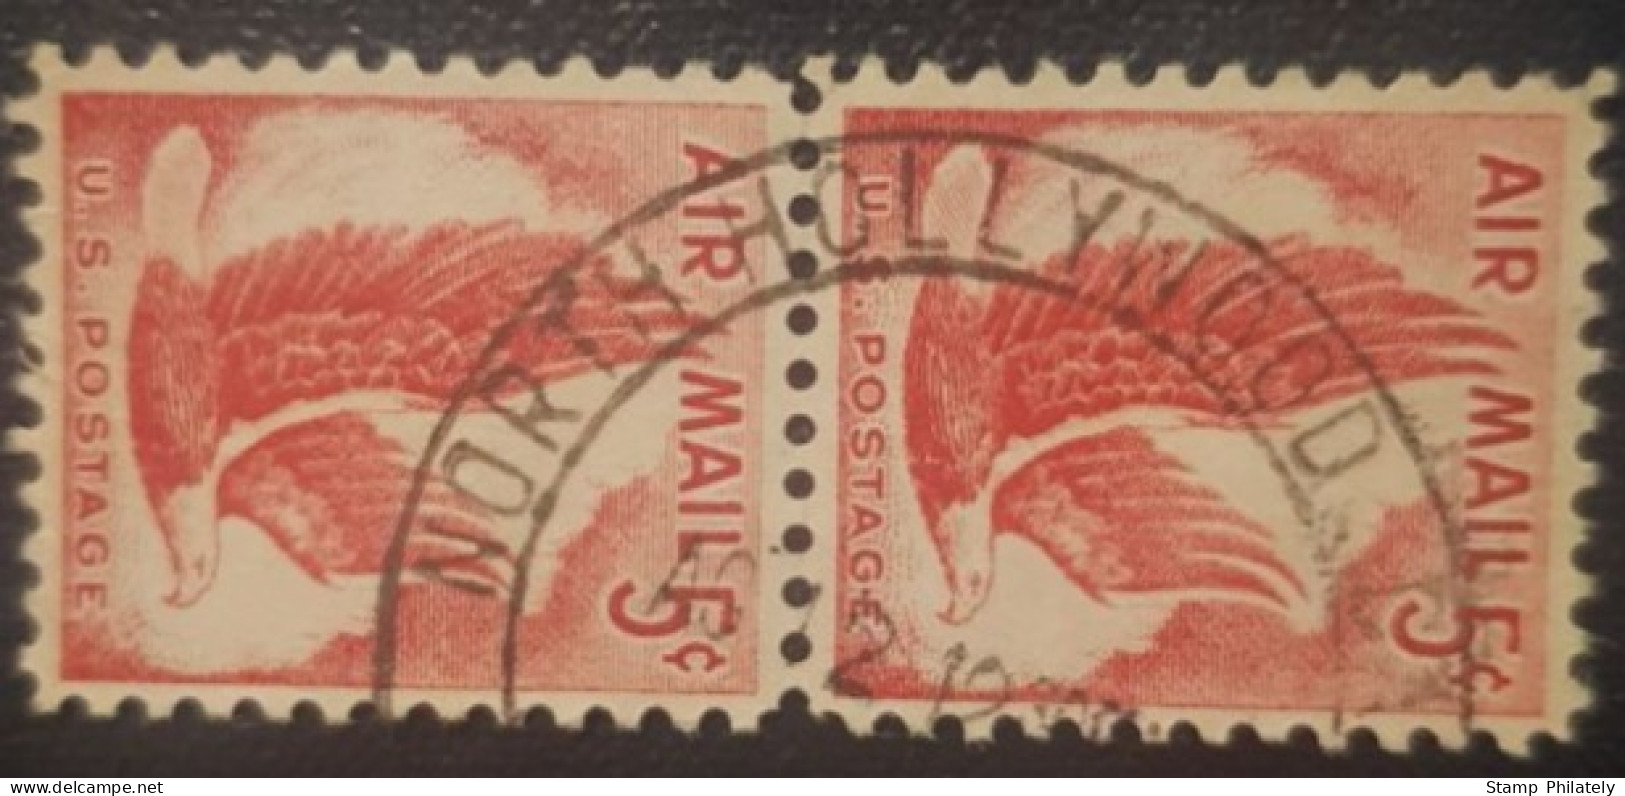 United States 5C Pair Used Postmark Stamp North Hollywood Cancel - 2a. 1941-1960 Usati